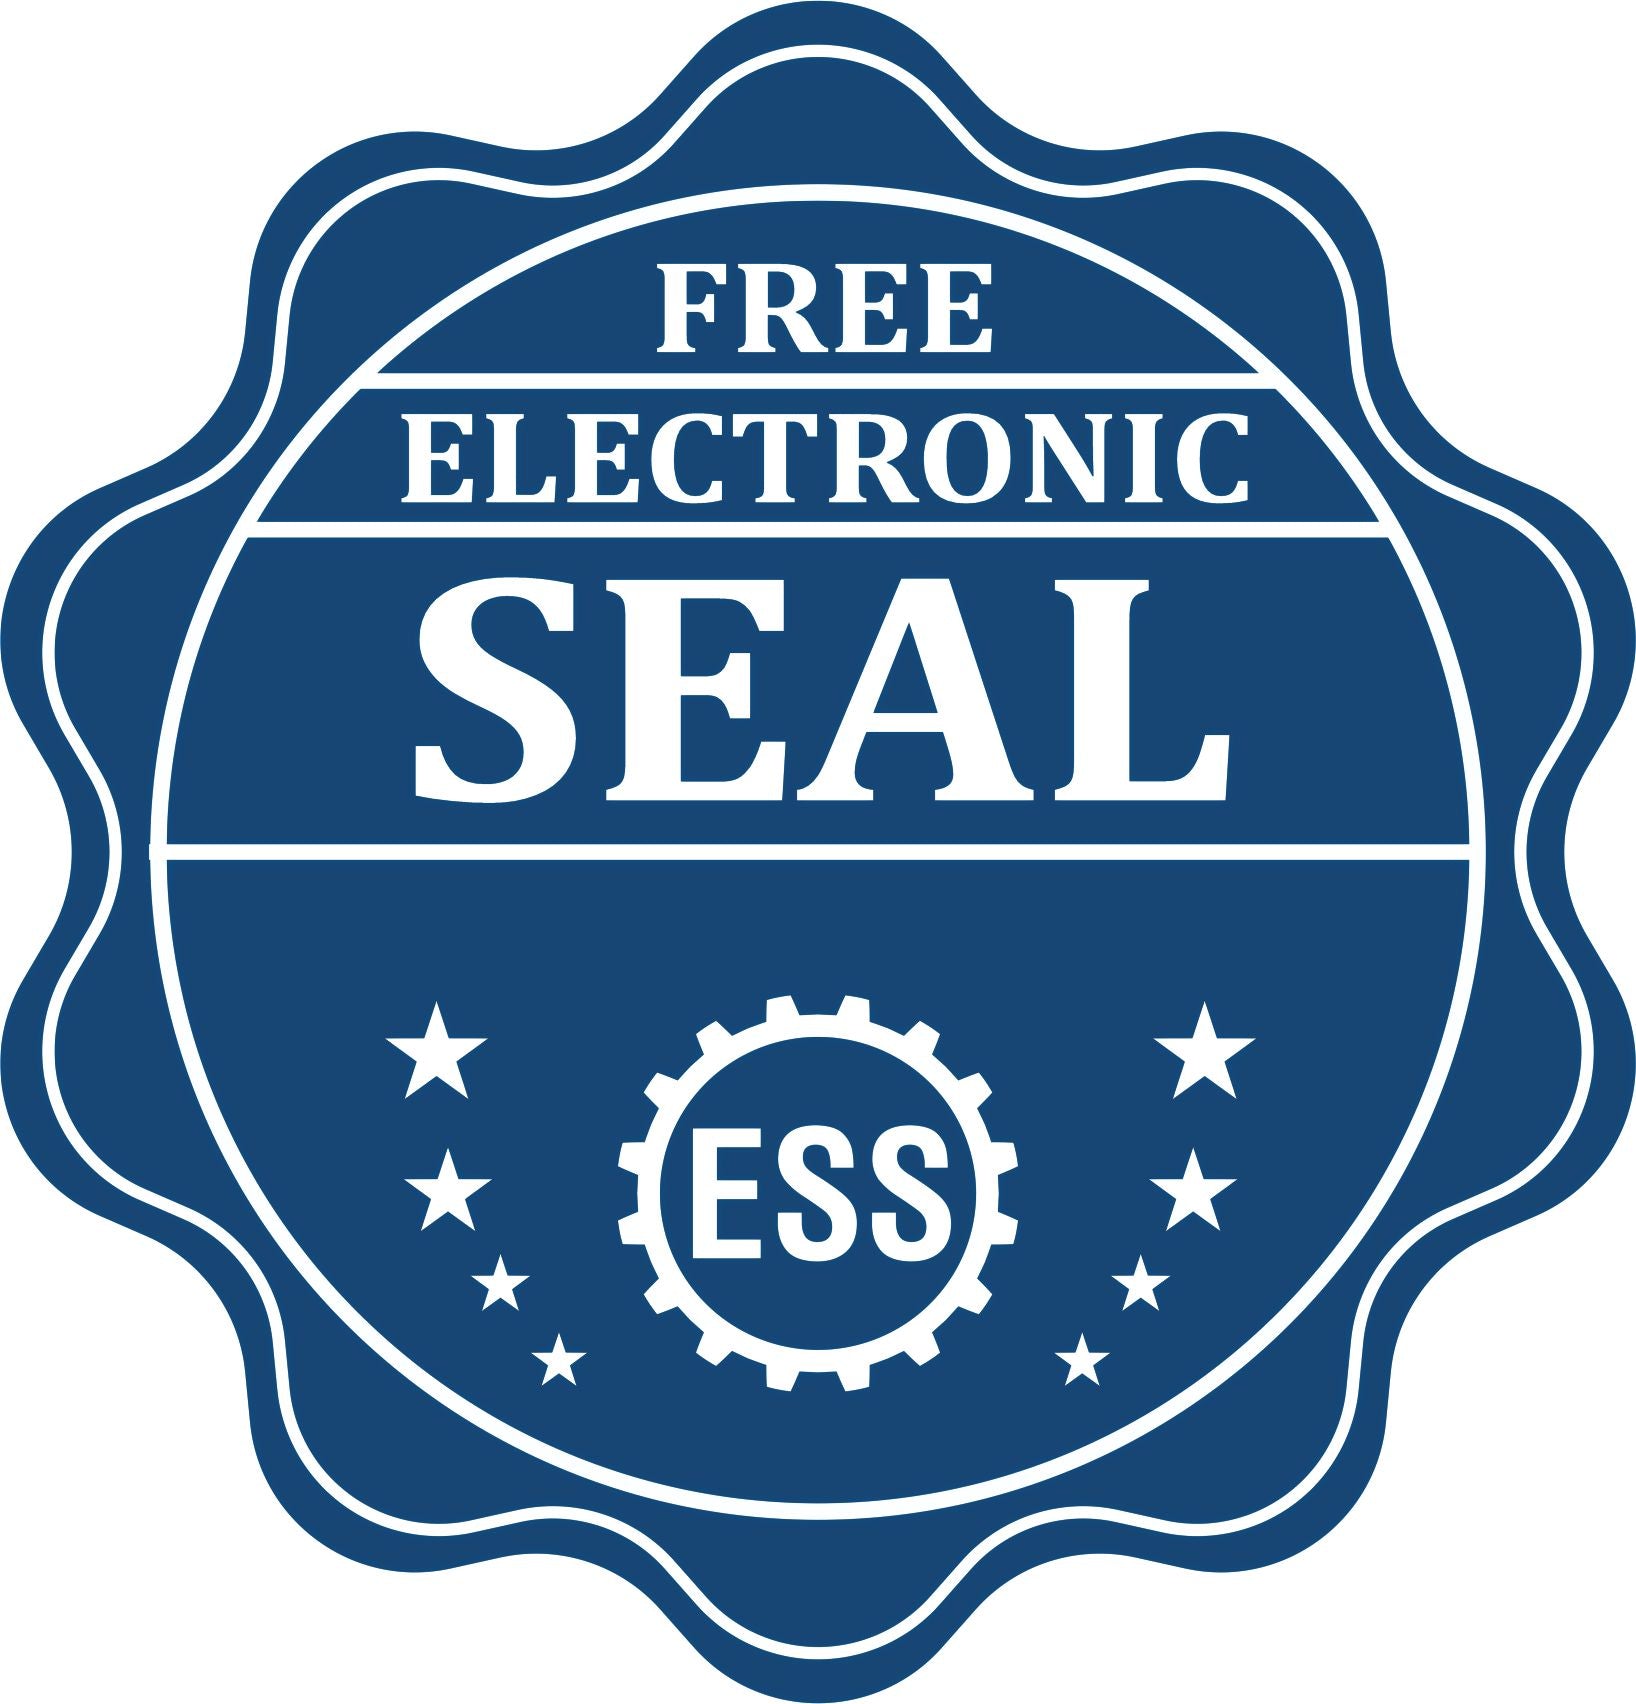 A badge showing a free electronic seal for the Super Slim Washington Notary Public Stamp with stars and the ESS gear on the emblem.